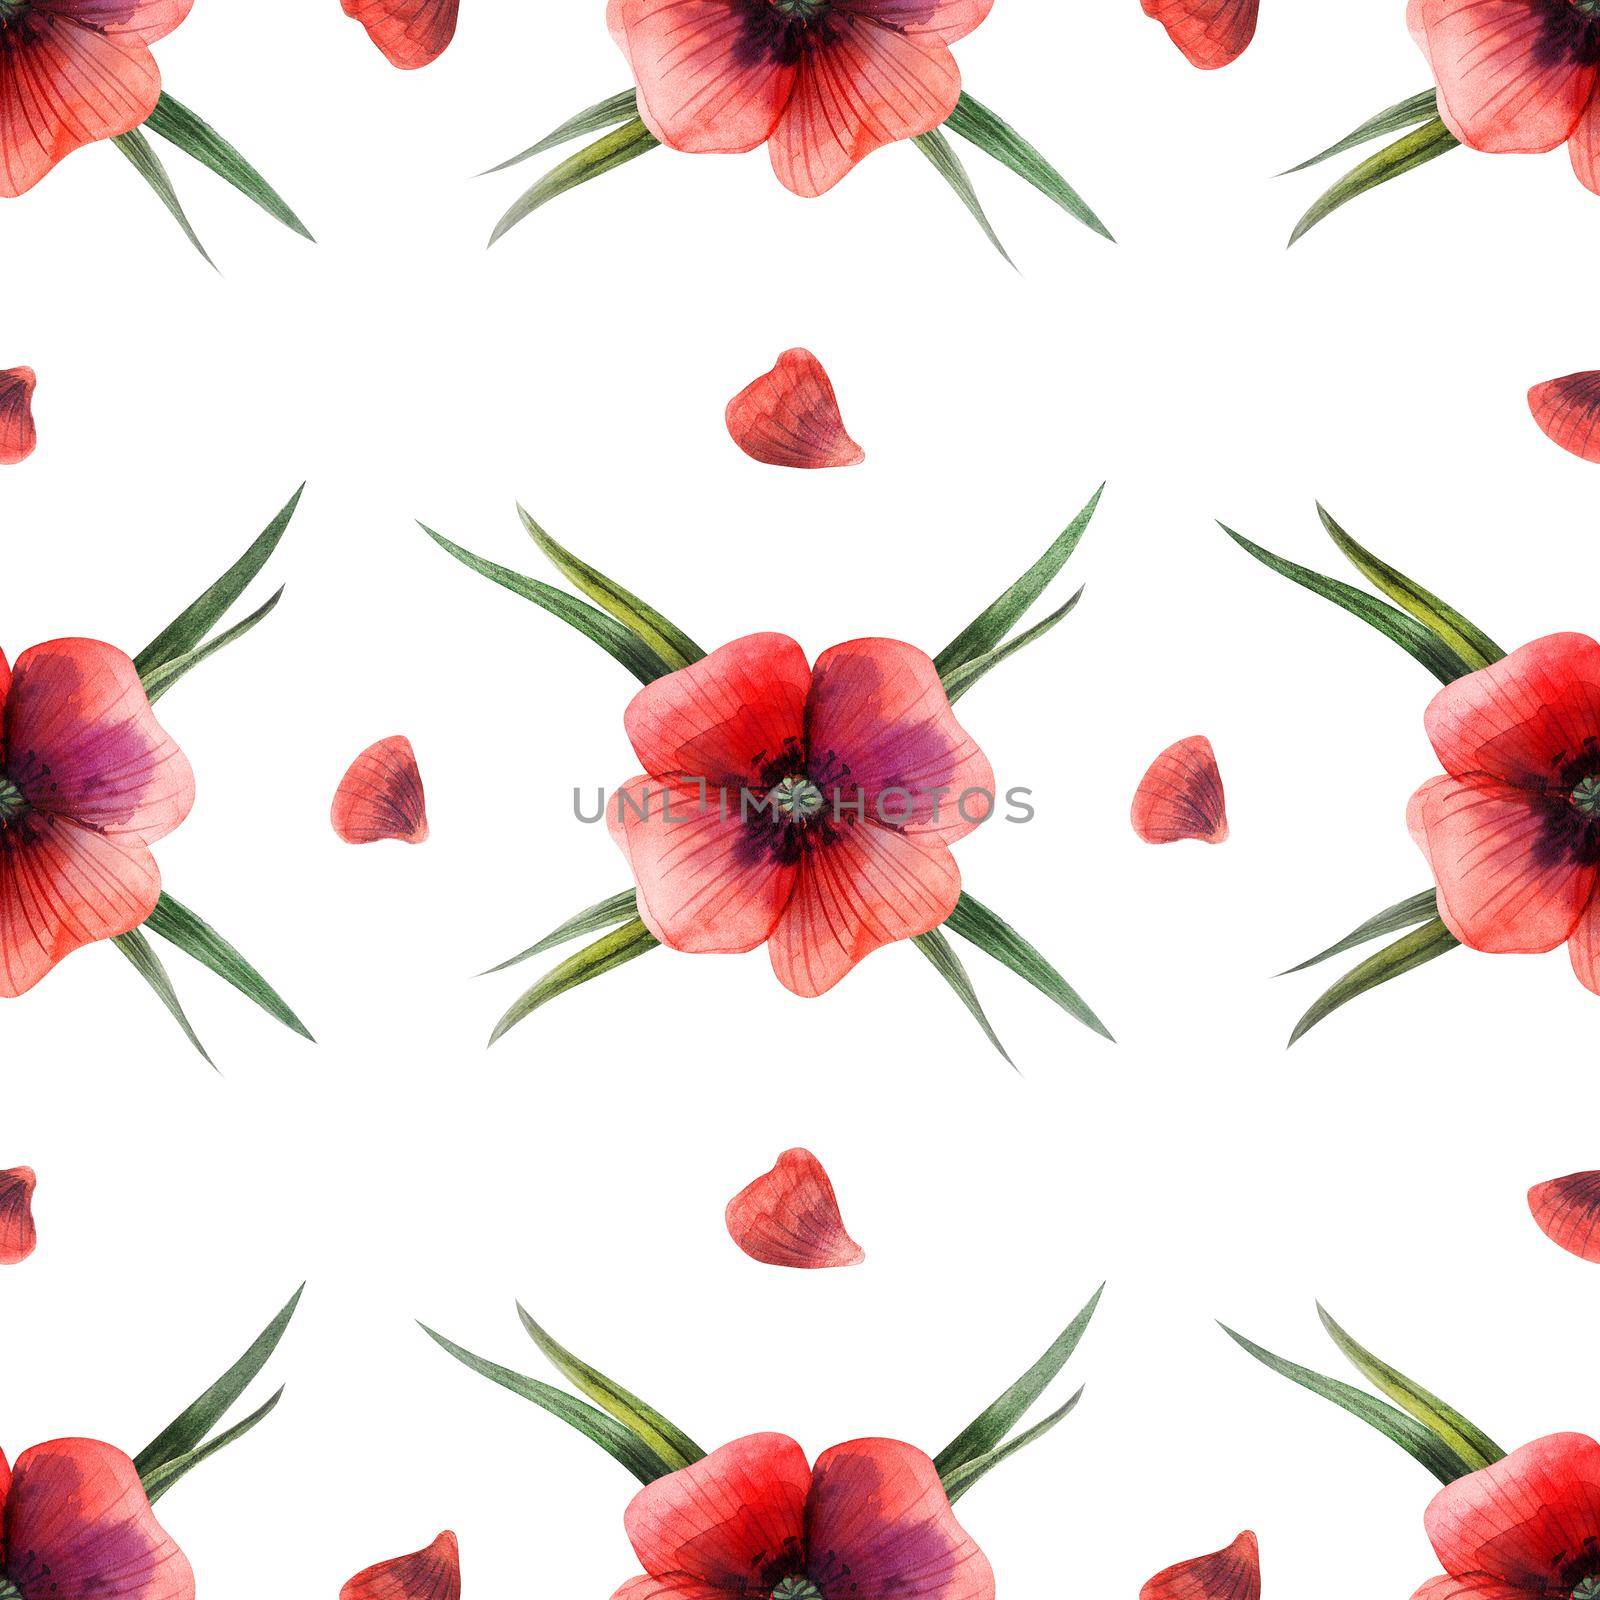 Decorative watercolor illustration. Red poppy flowers and green grass. Seamless pattern with included path